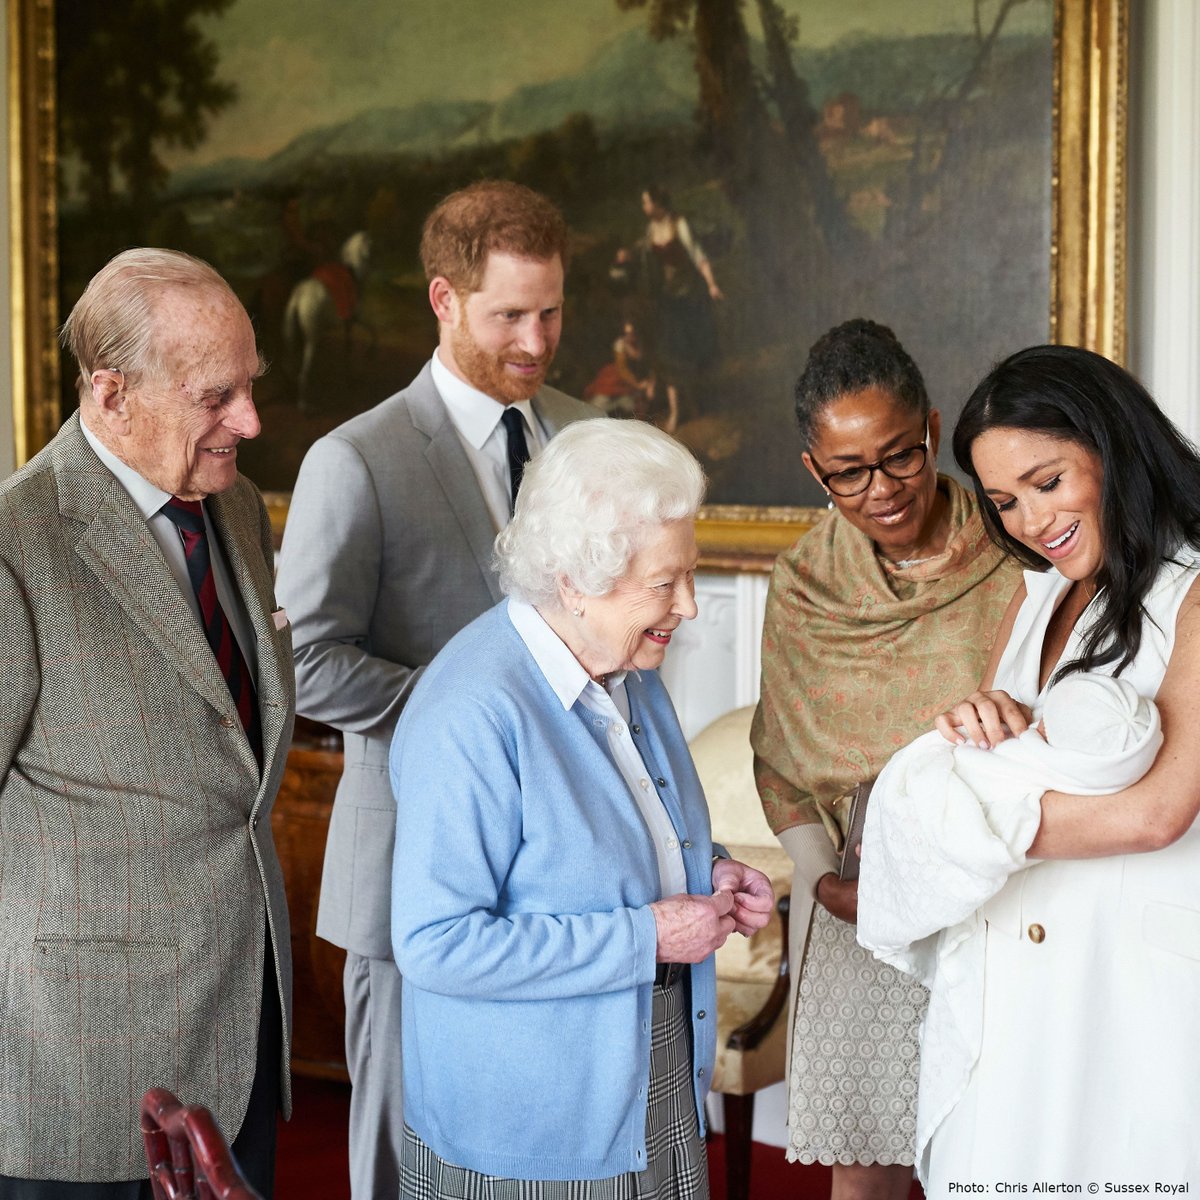 NZ family gets forth royal name as Britain welcomes newborn Archie